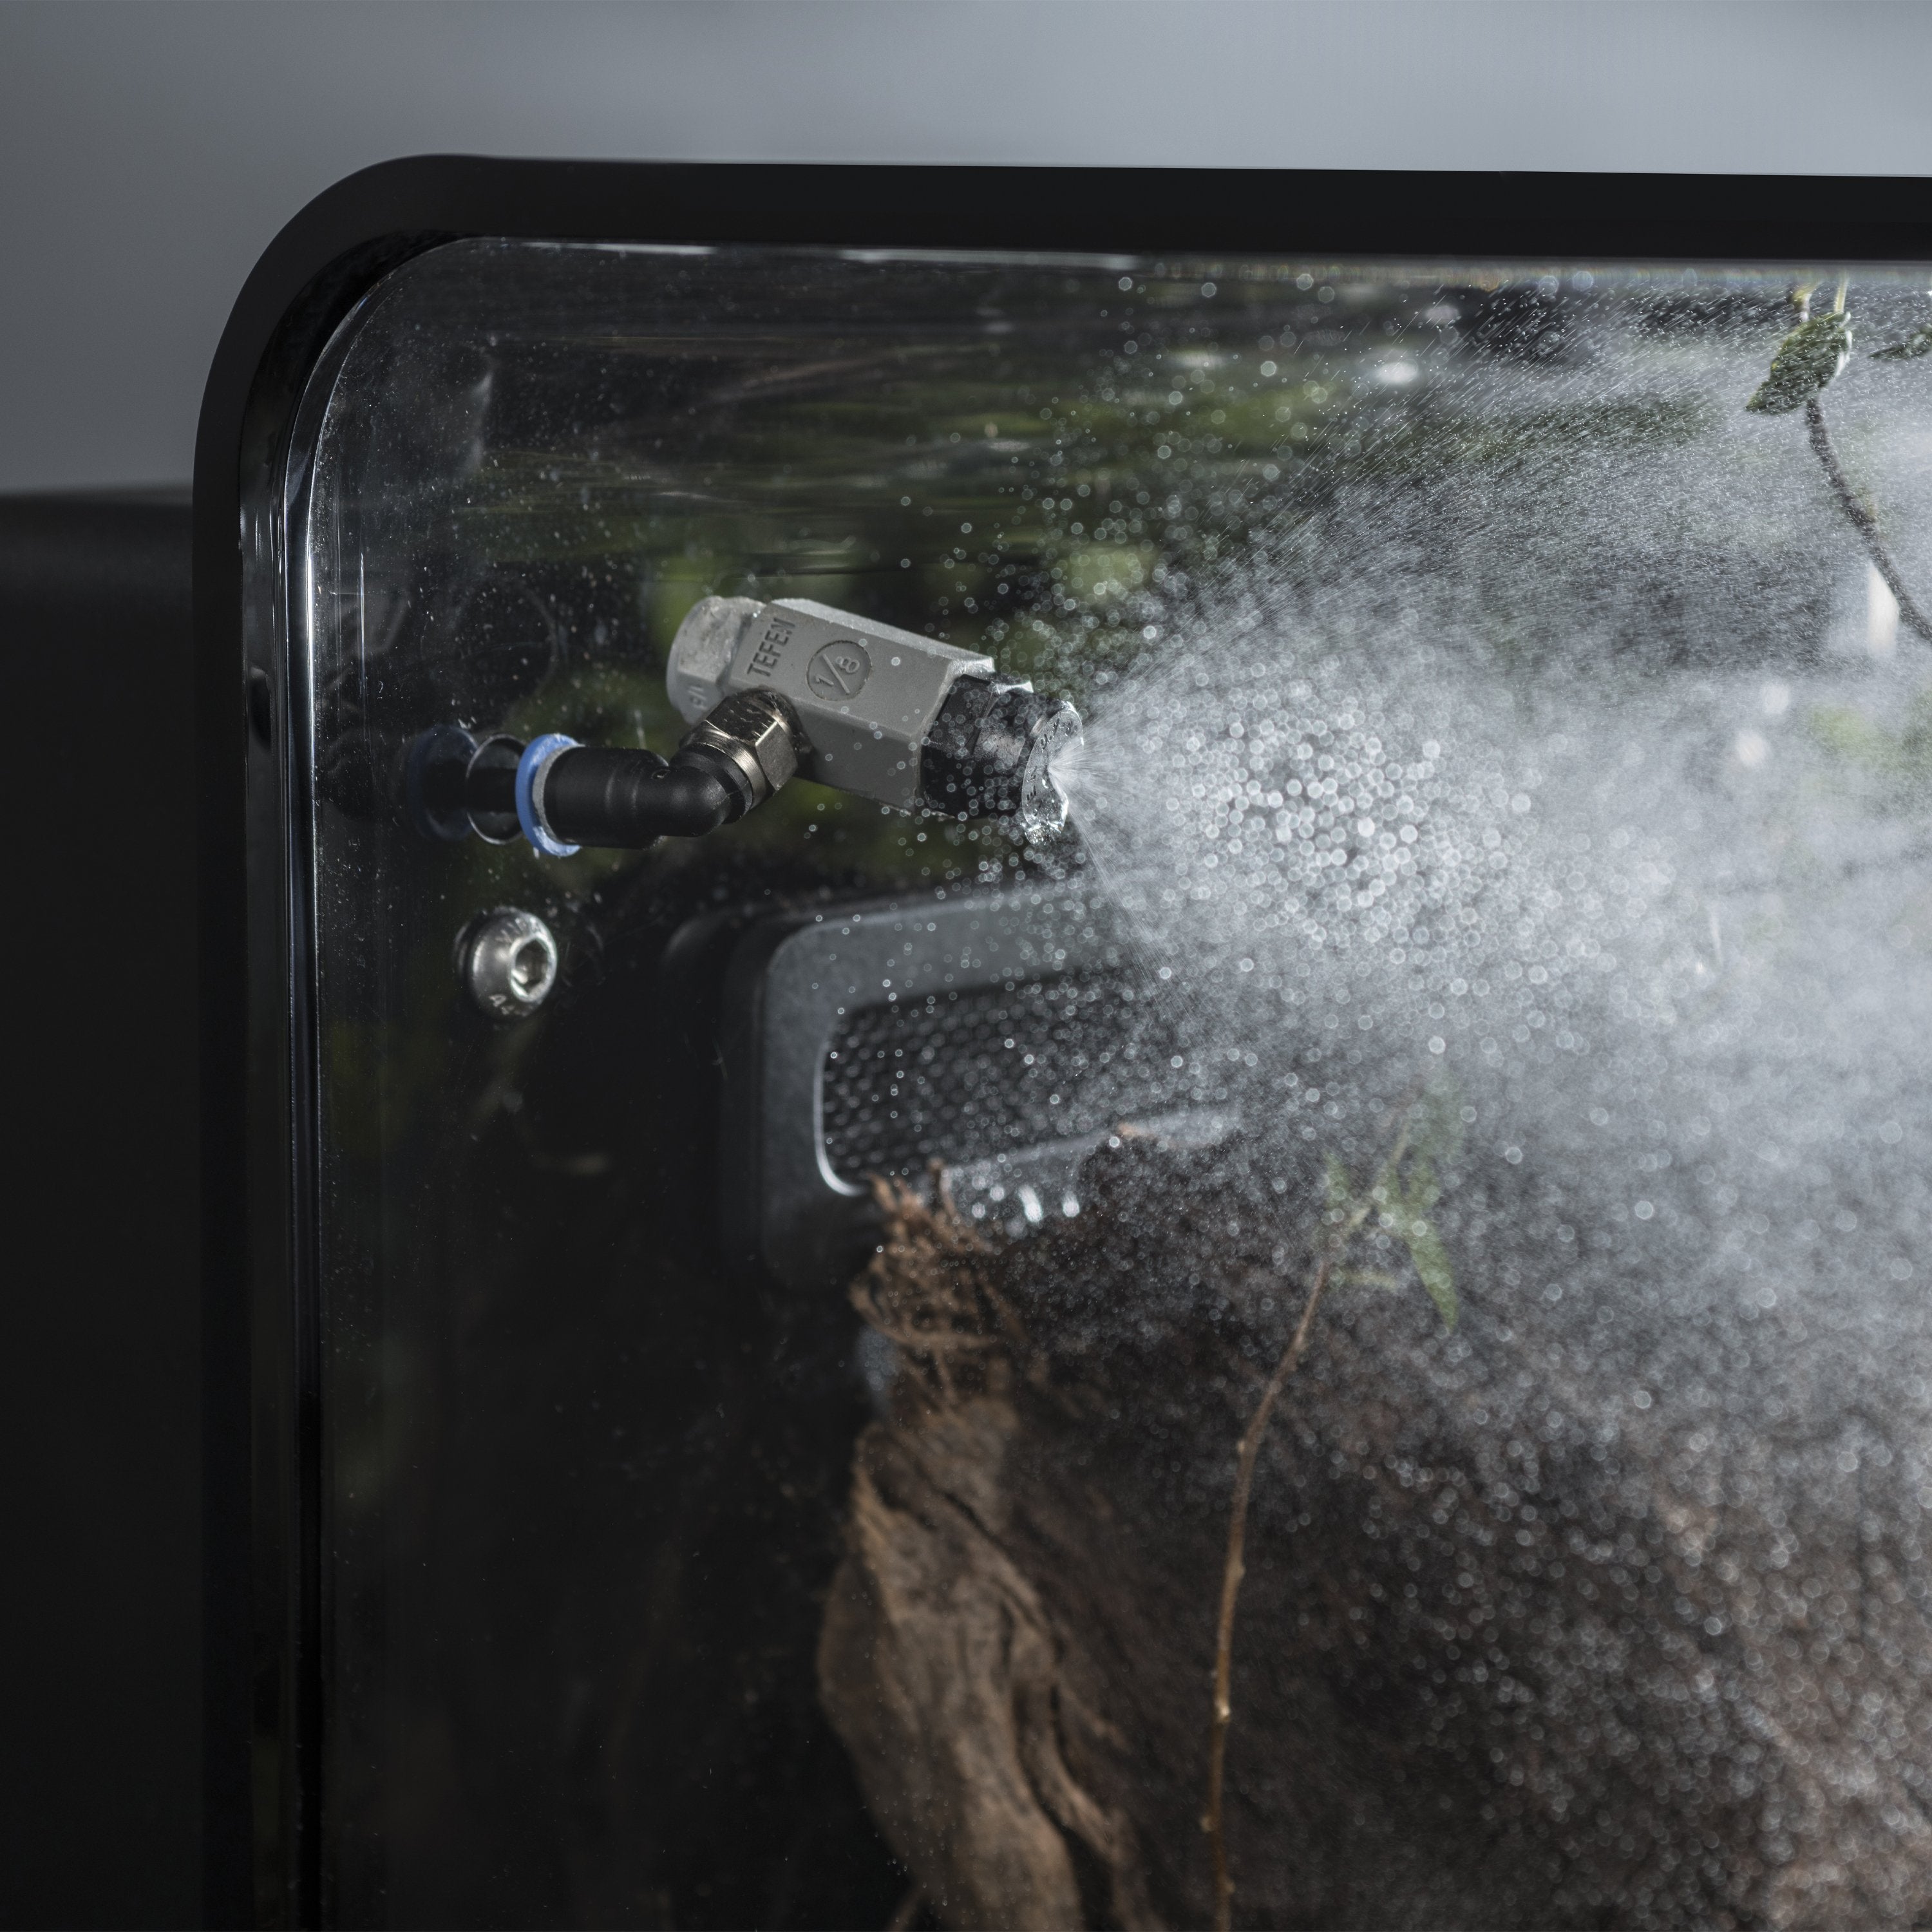 EARTH Vivarium features Humidity Monitoring and Control